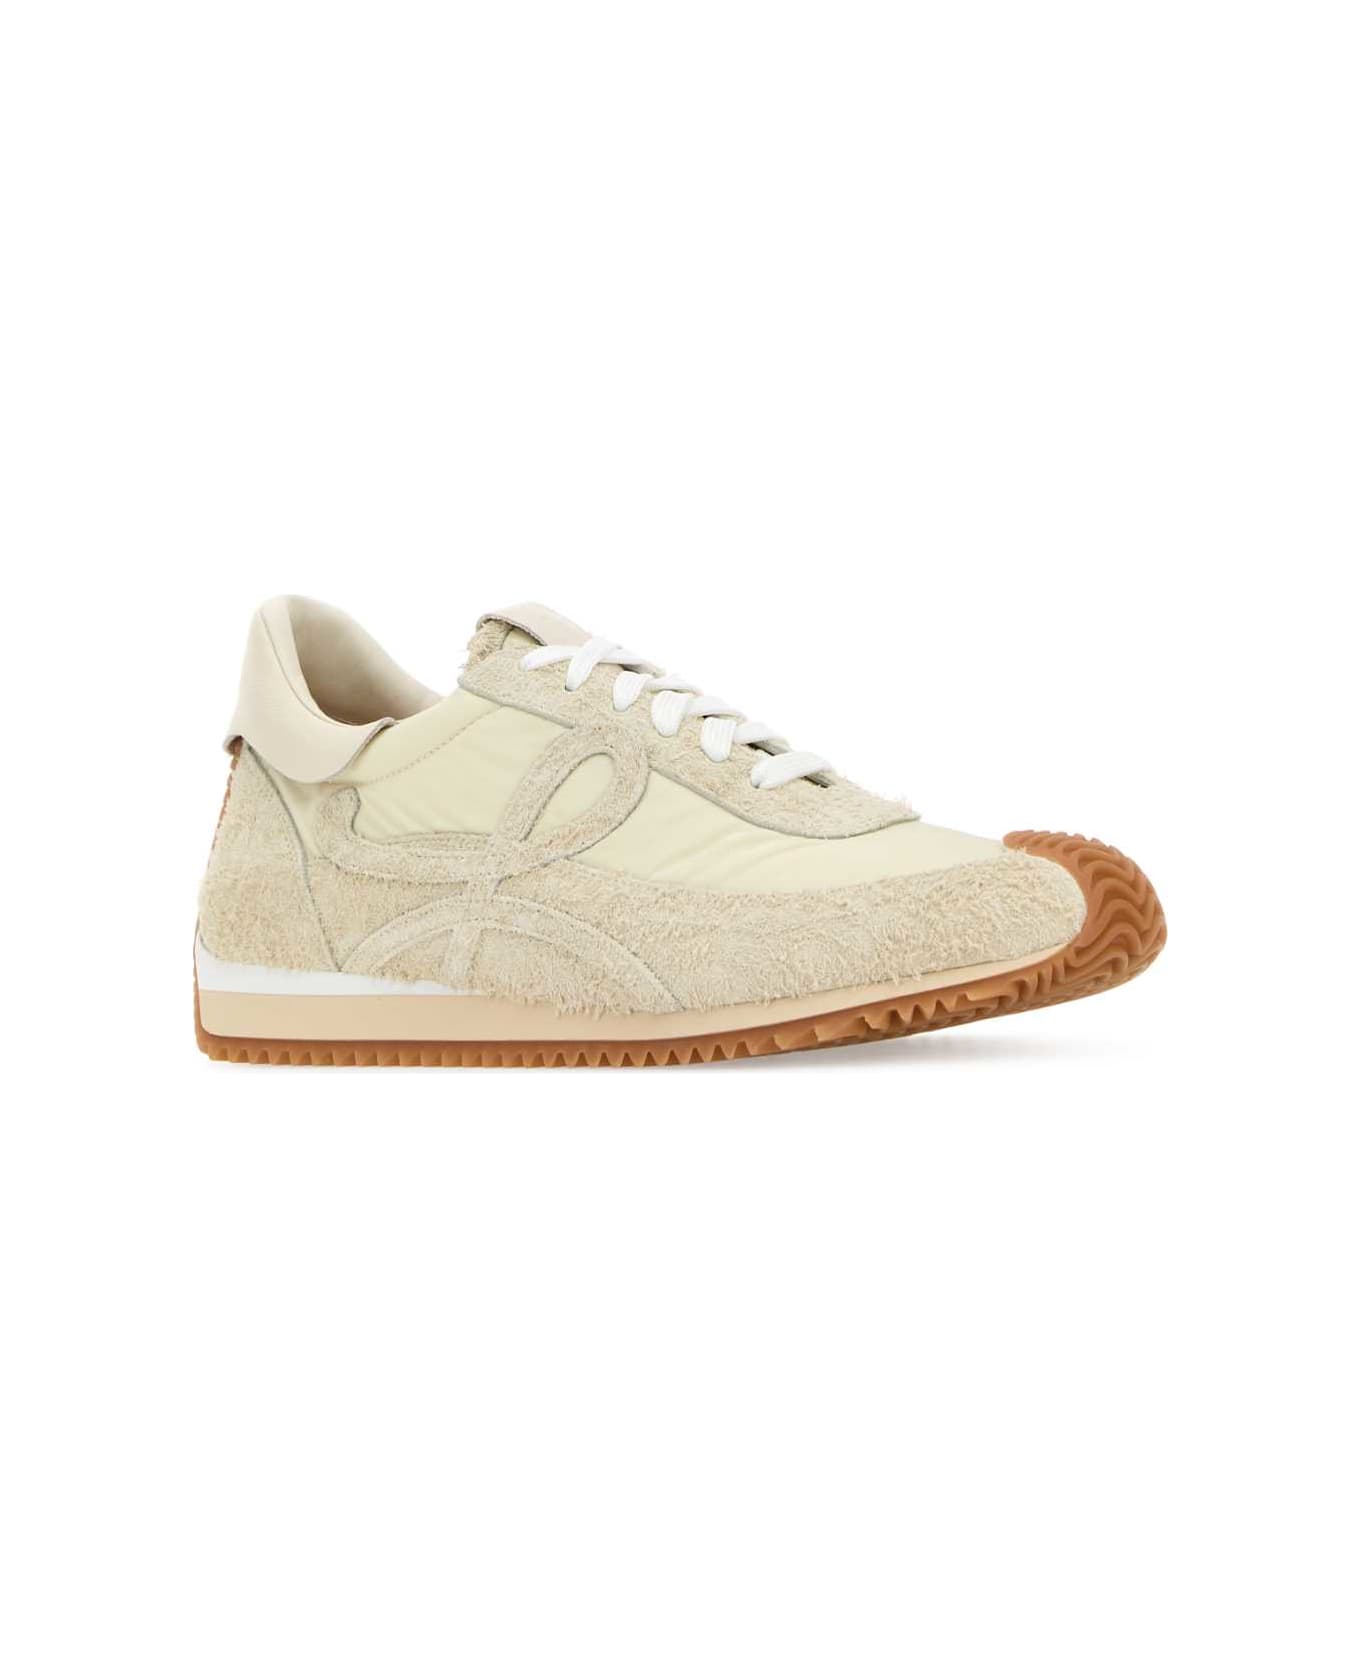 Loewe Ivory Suede And Nylon Flow Runner Sneakers - CANVASSOFTWHITE スニーカー